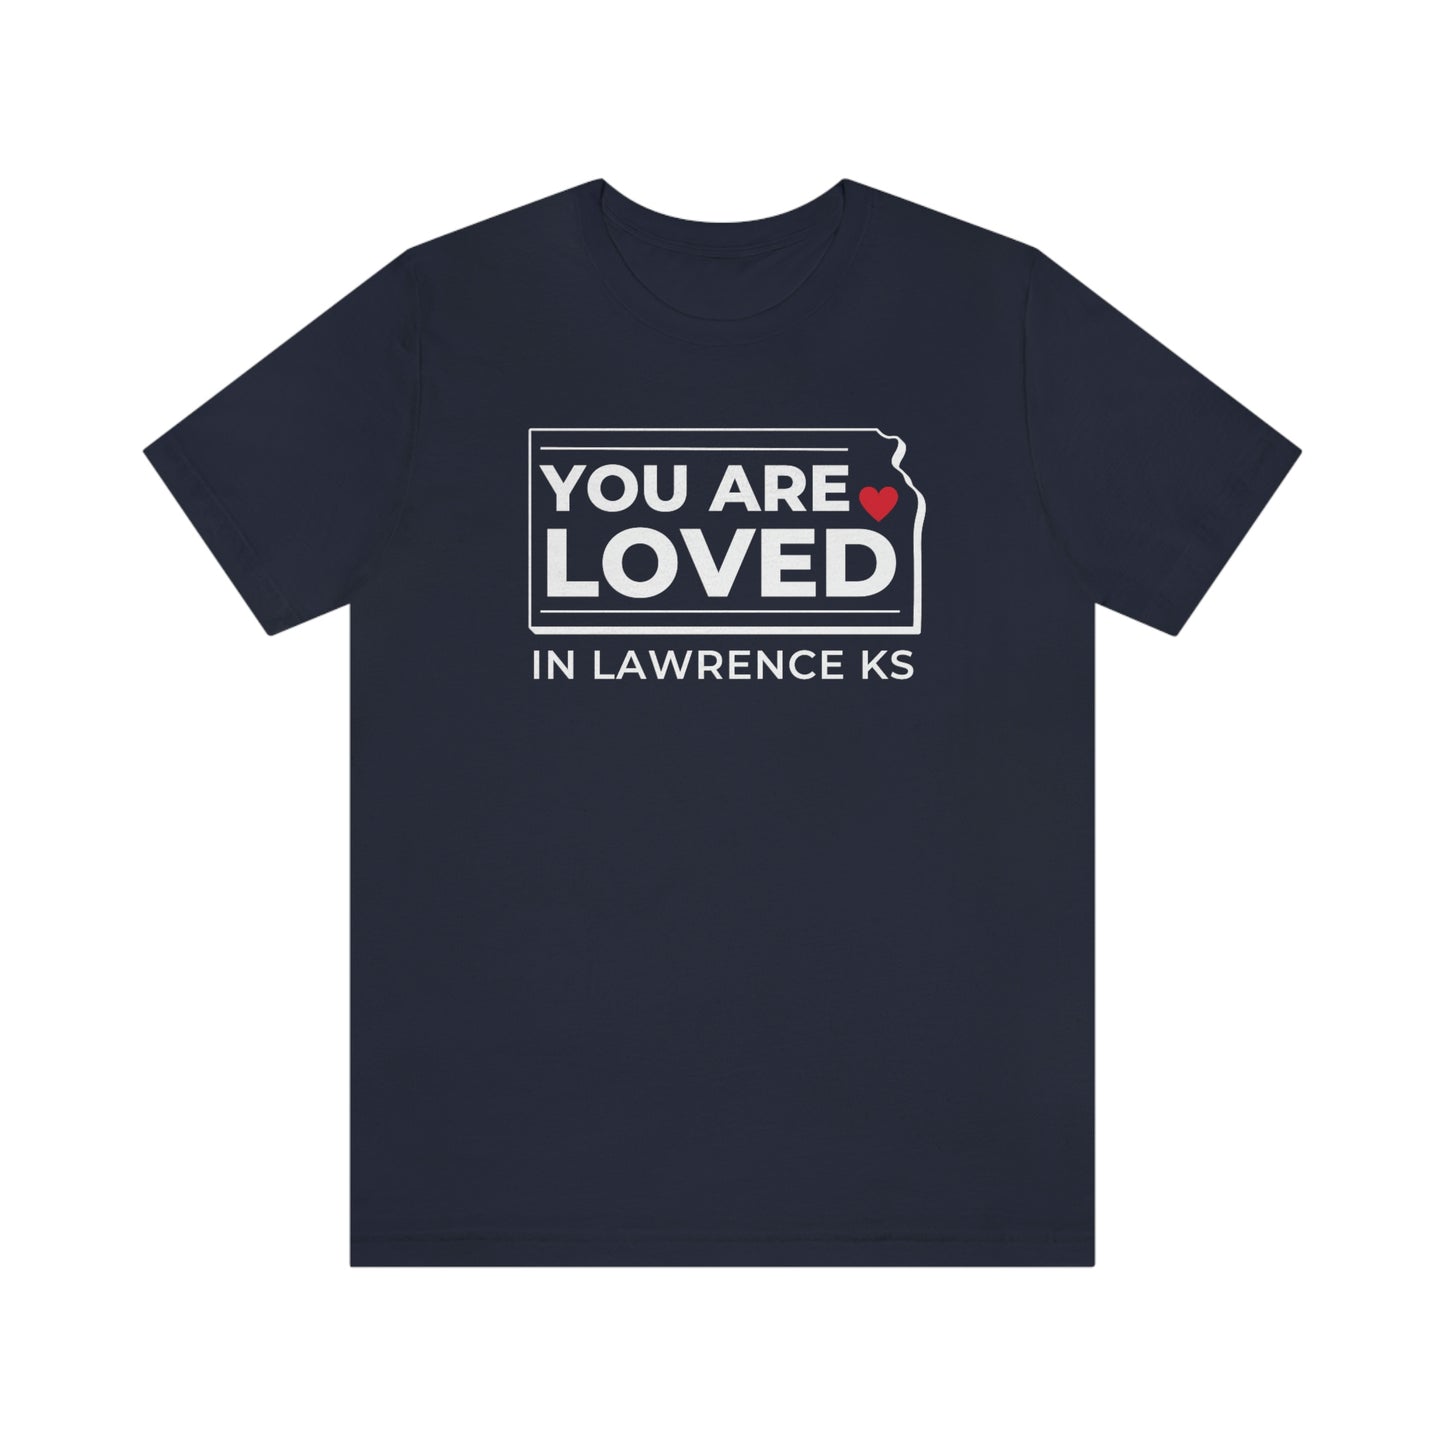 "YOU ARE LOVED ❤️ in Lawrence KS" T-Shirt  [NAVY BLUE]